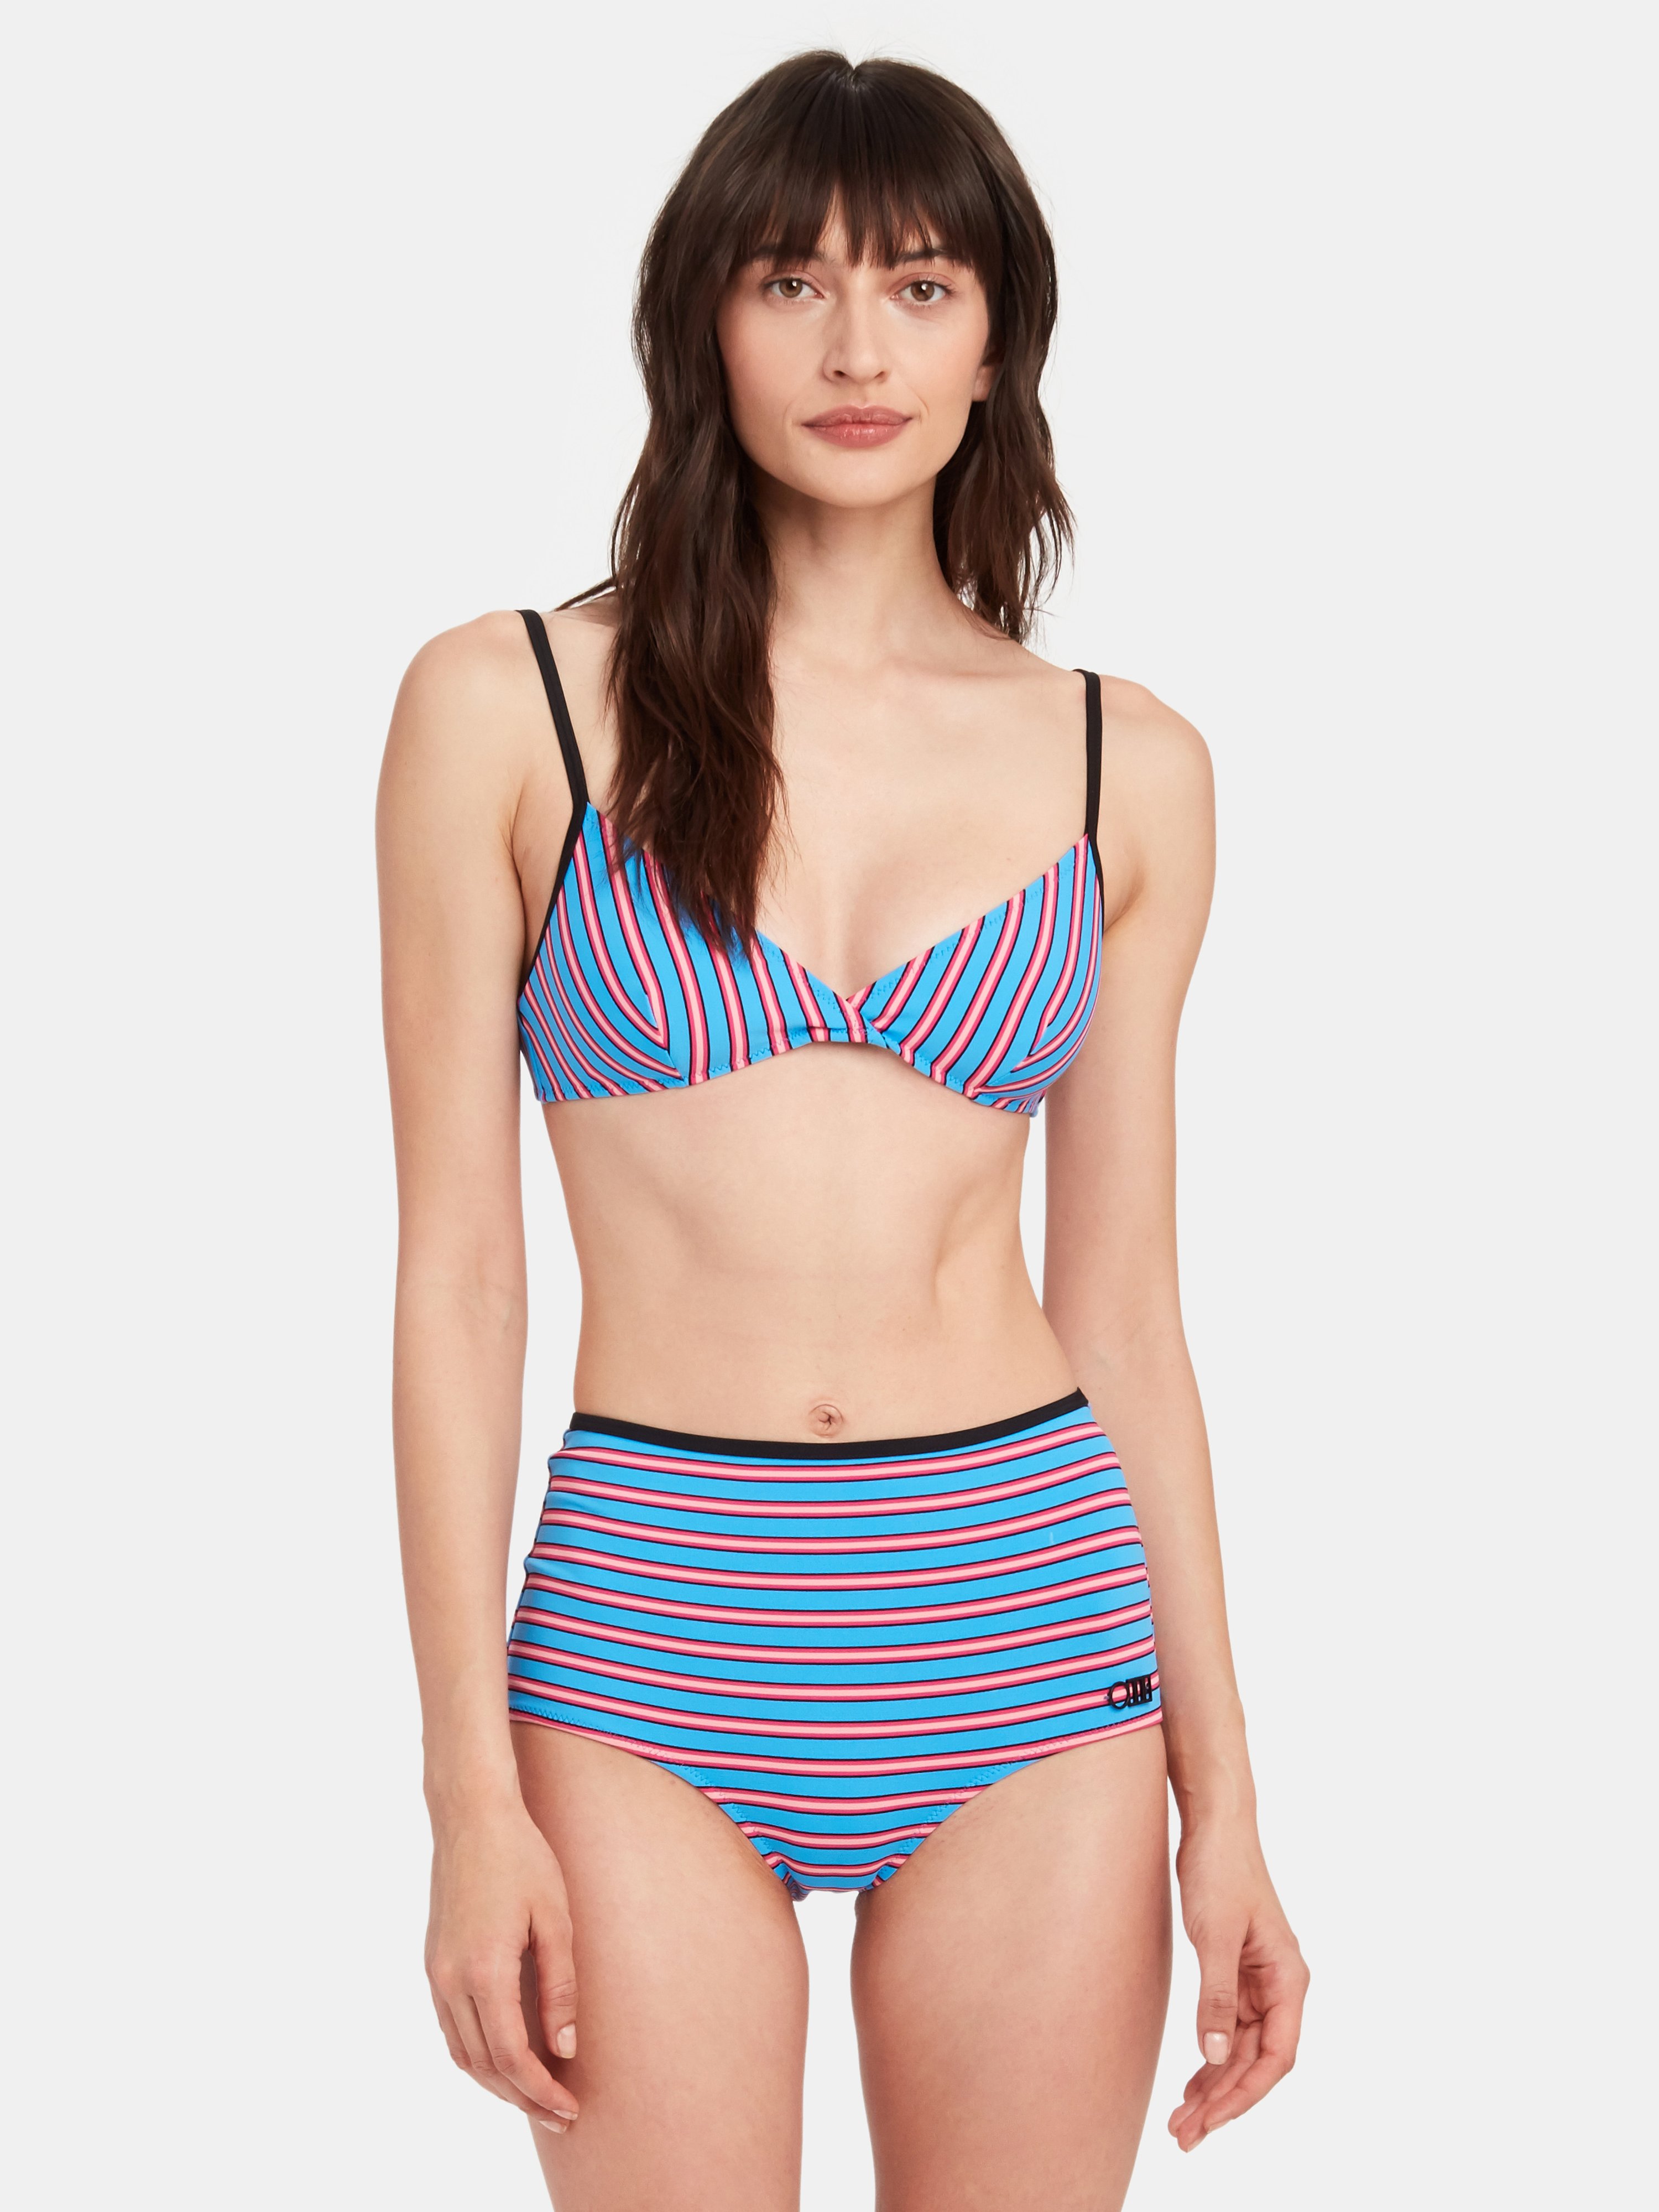 SOLID & STRIPED SOLID & STRIPED THE BRIGITTE HIGH RISE BOTTOM